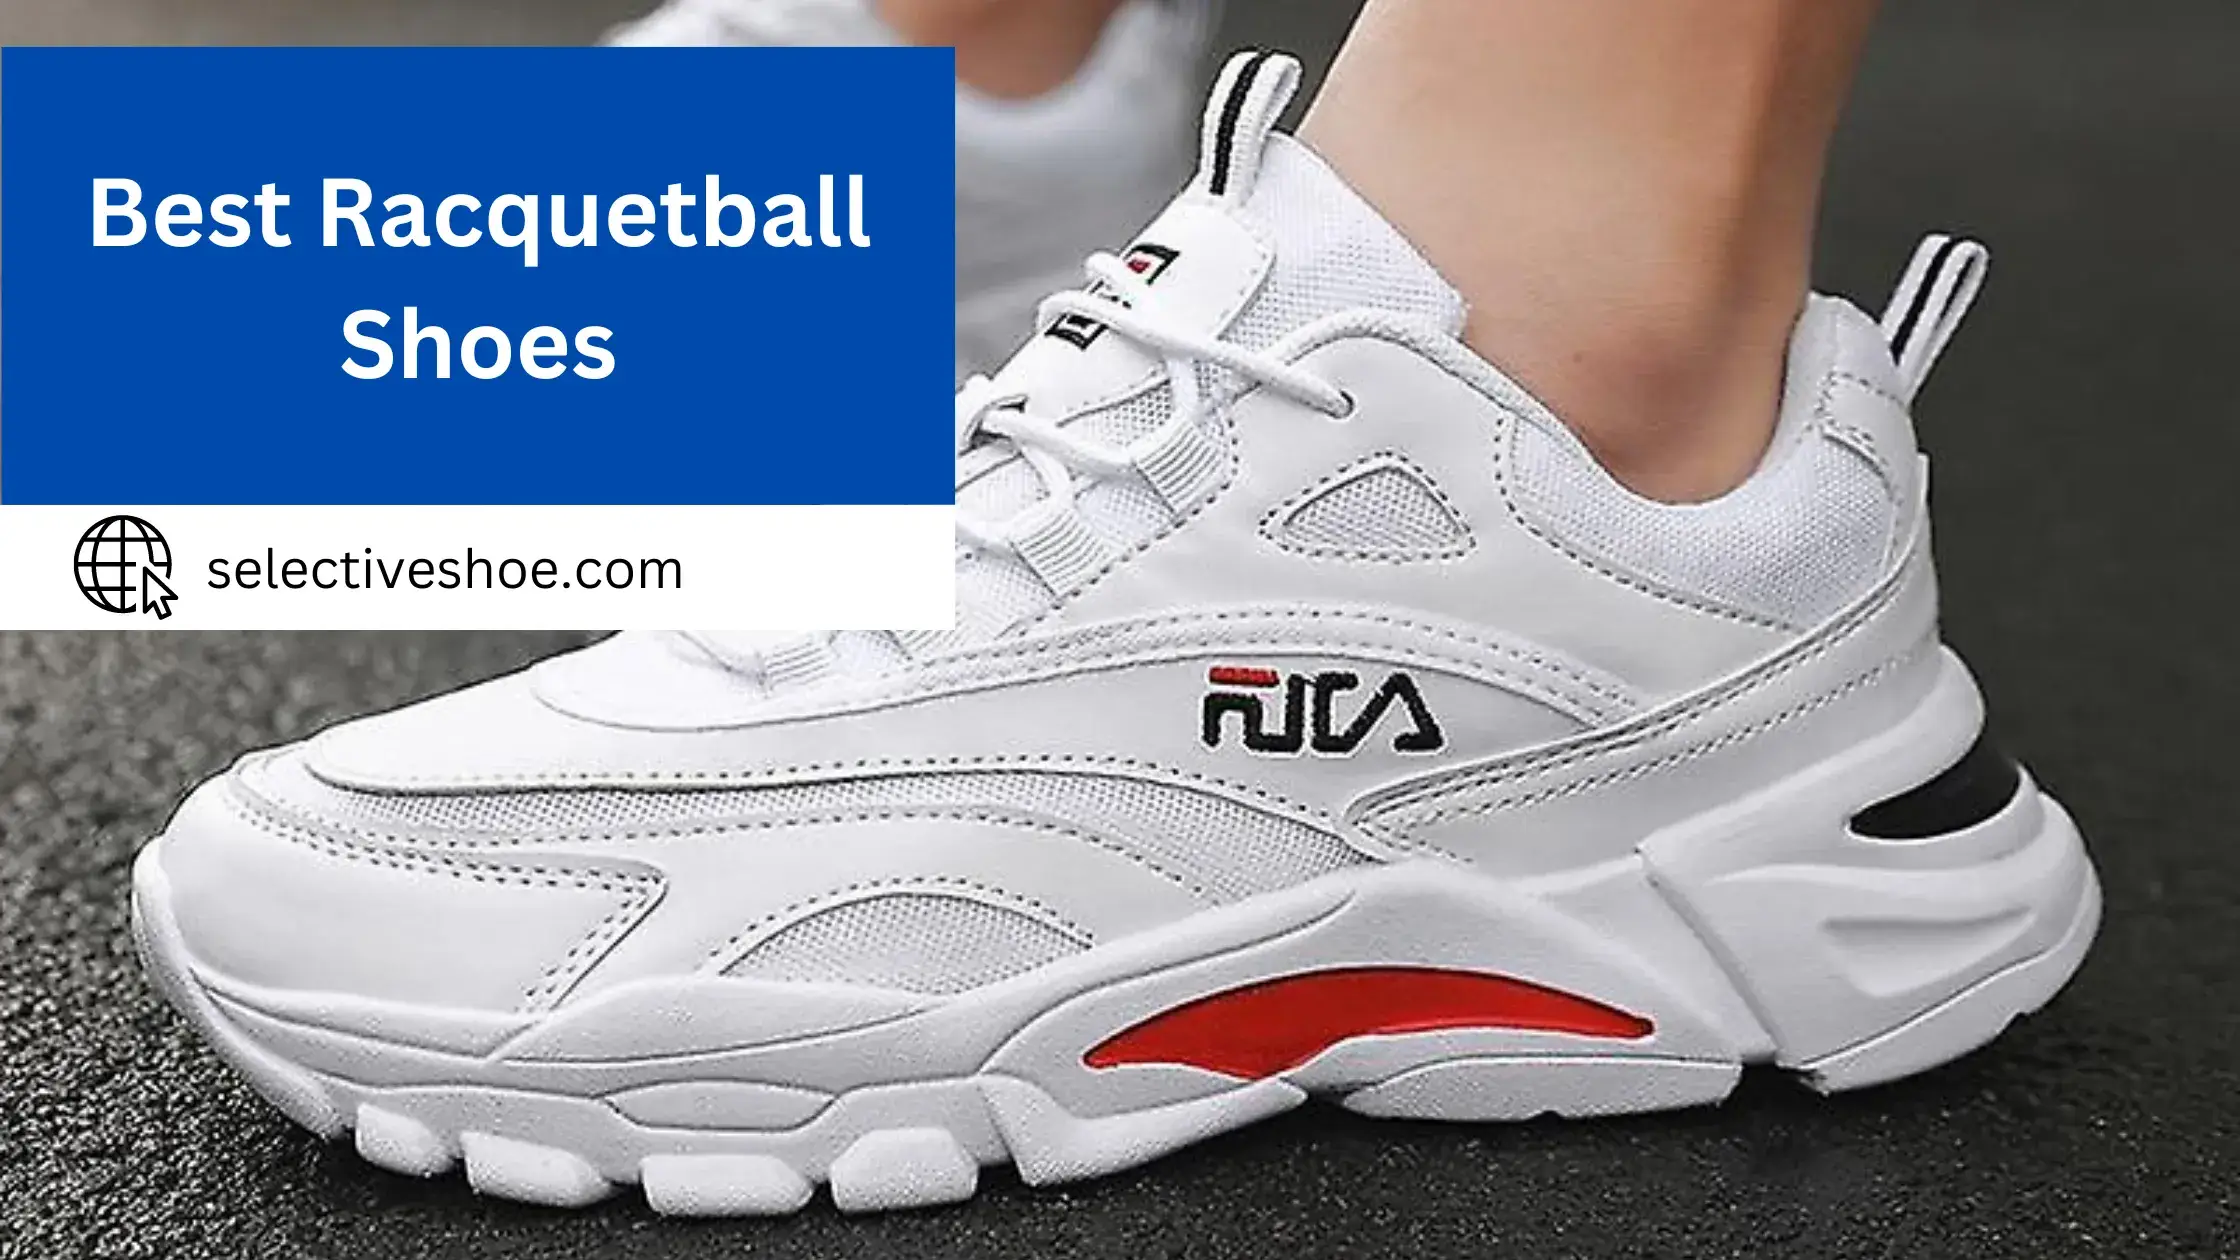 Best Racquetball Shoes - (An In-Depth Guide)